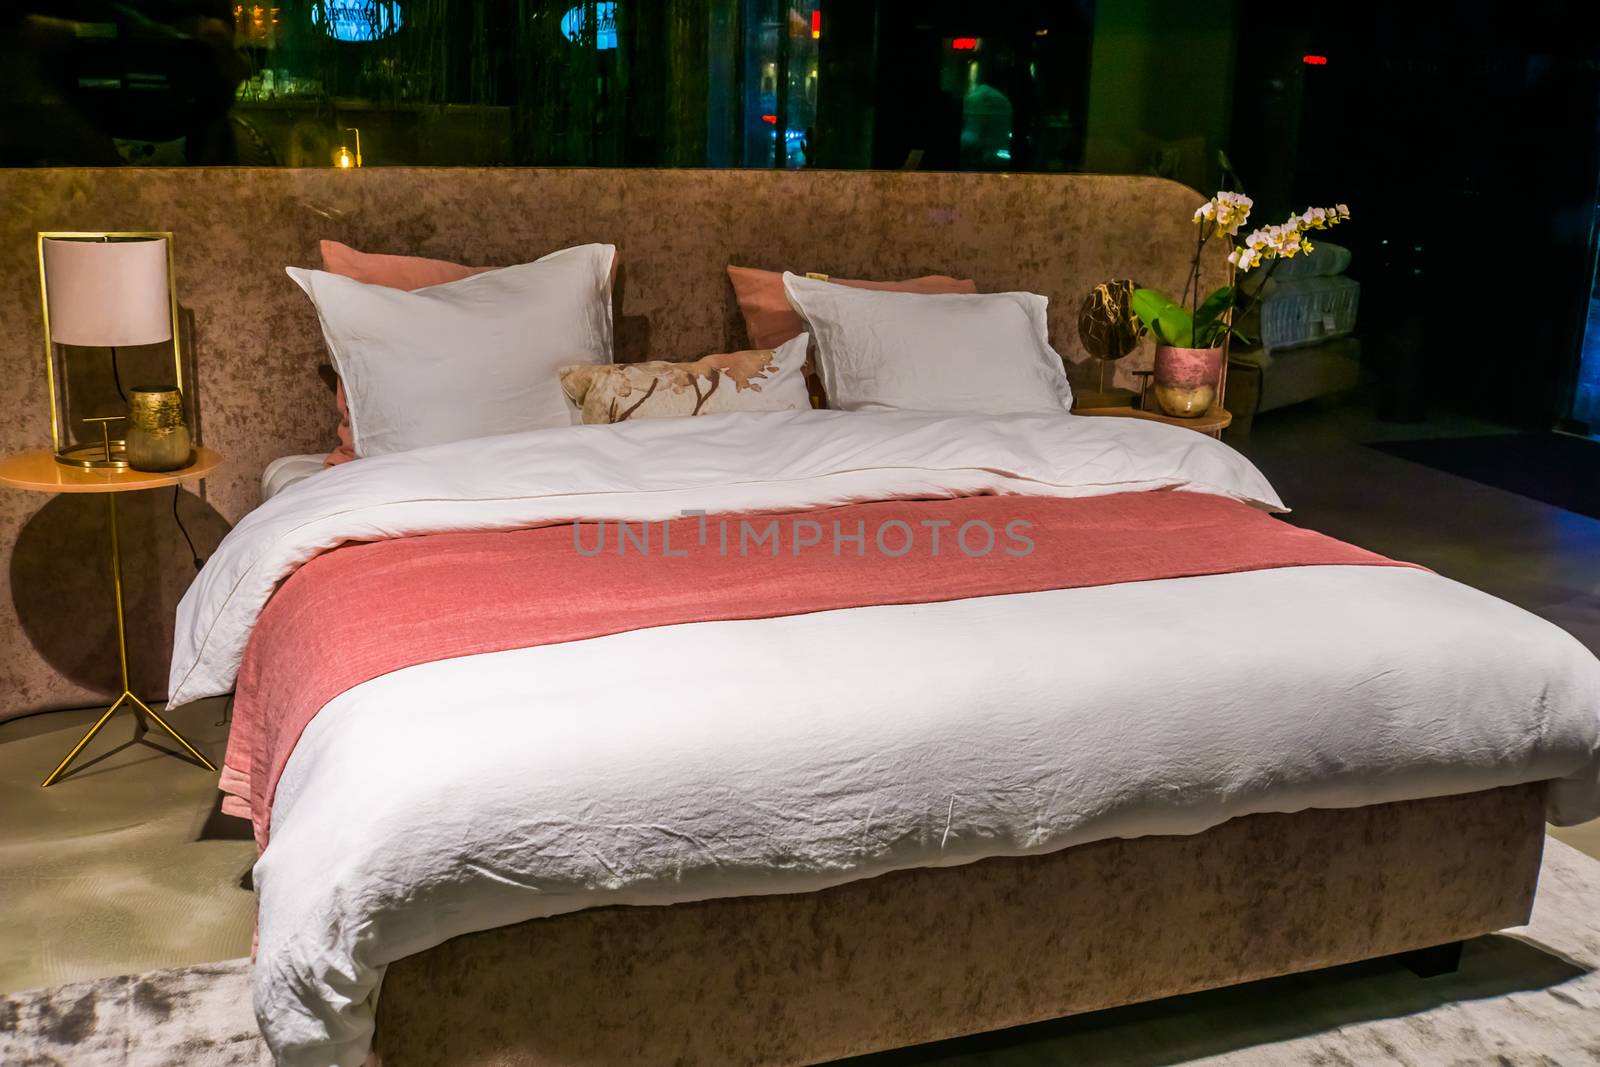 Modern double bed, luxurious bedroom interior, made bed with sheets and pillows